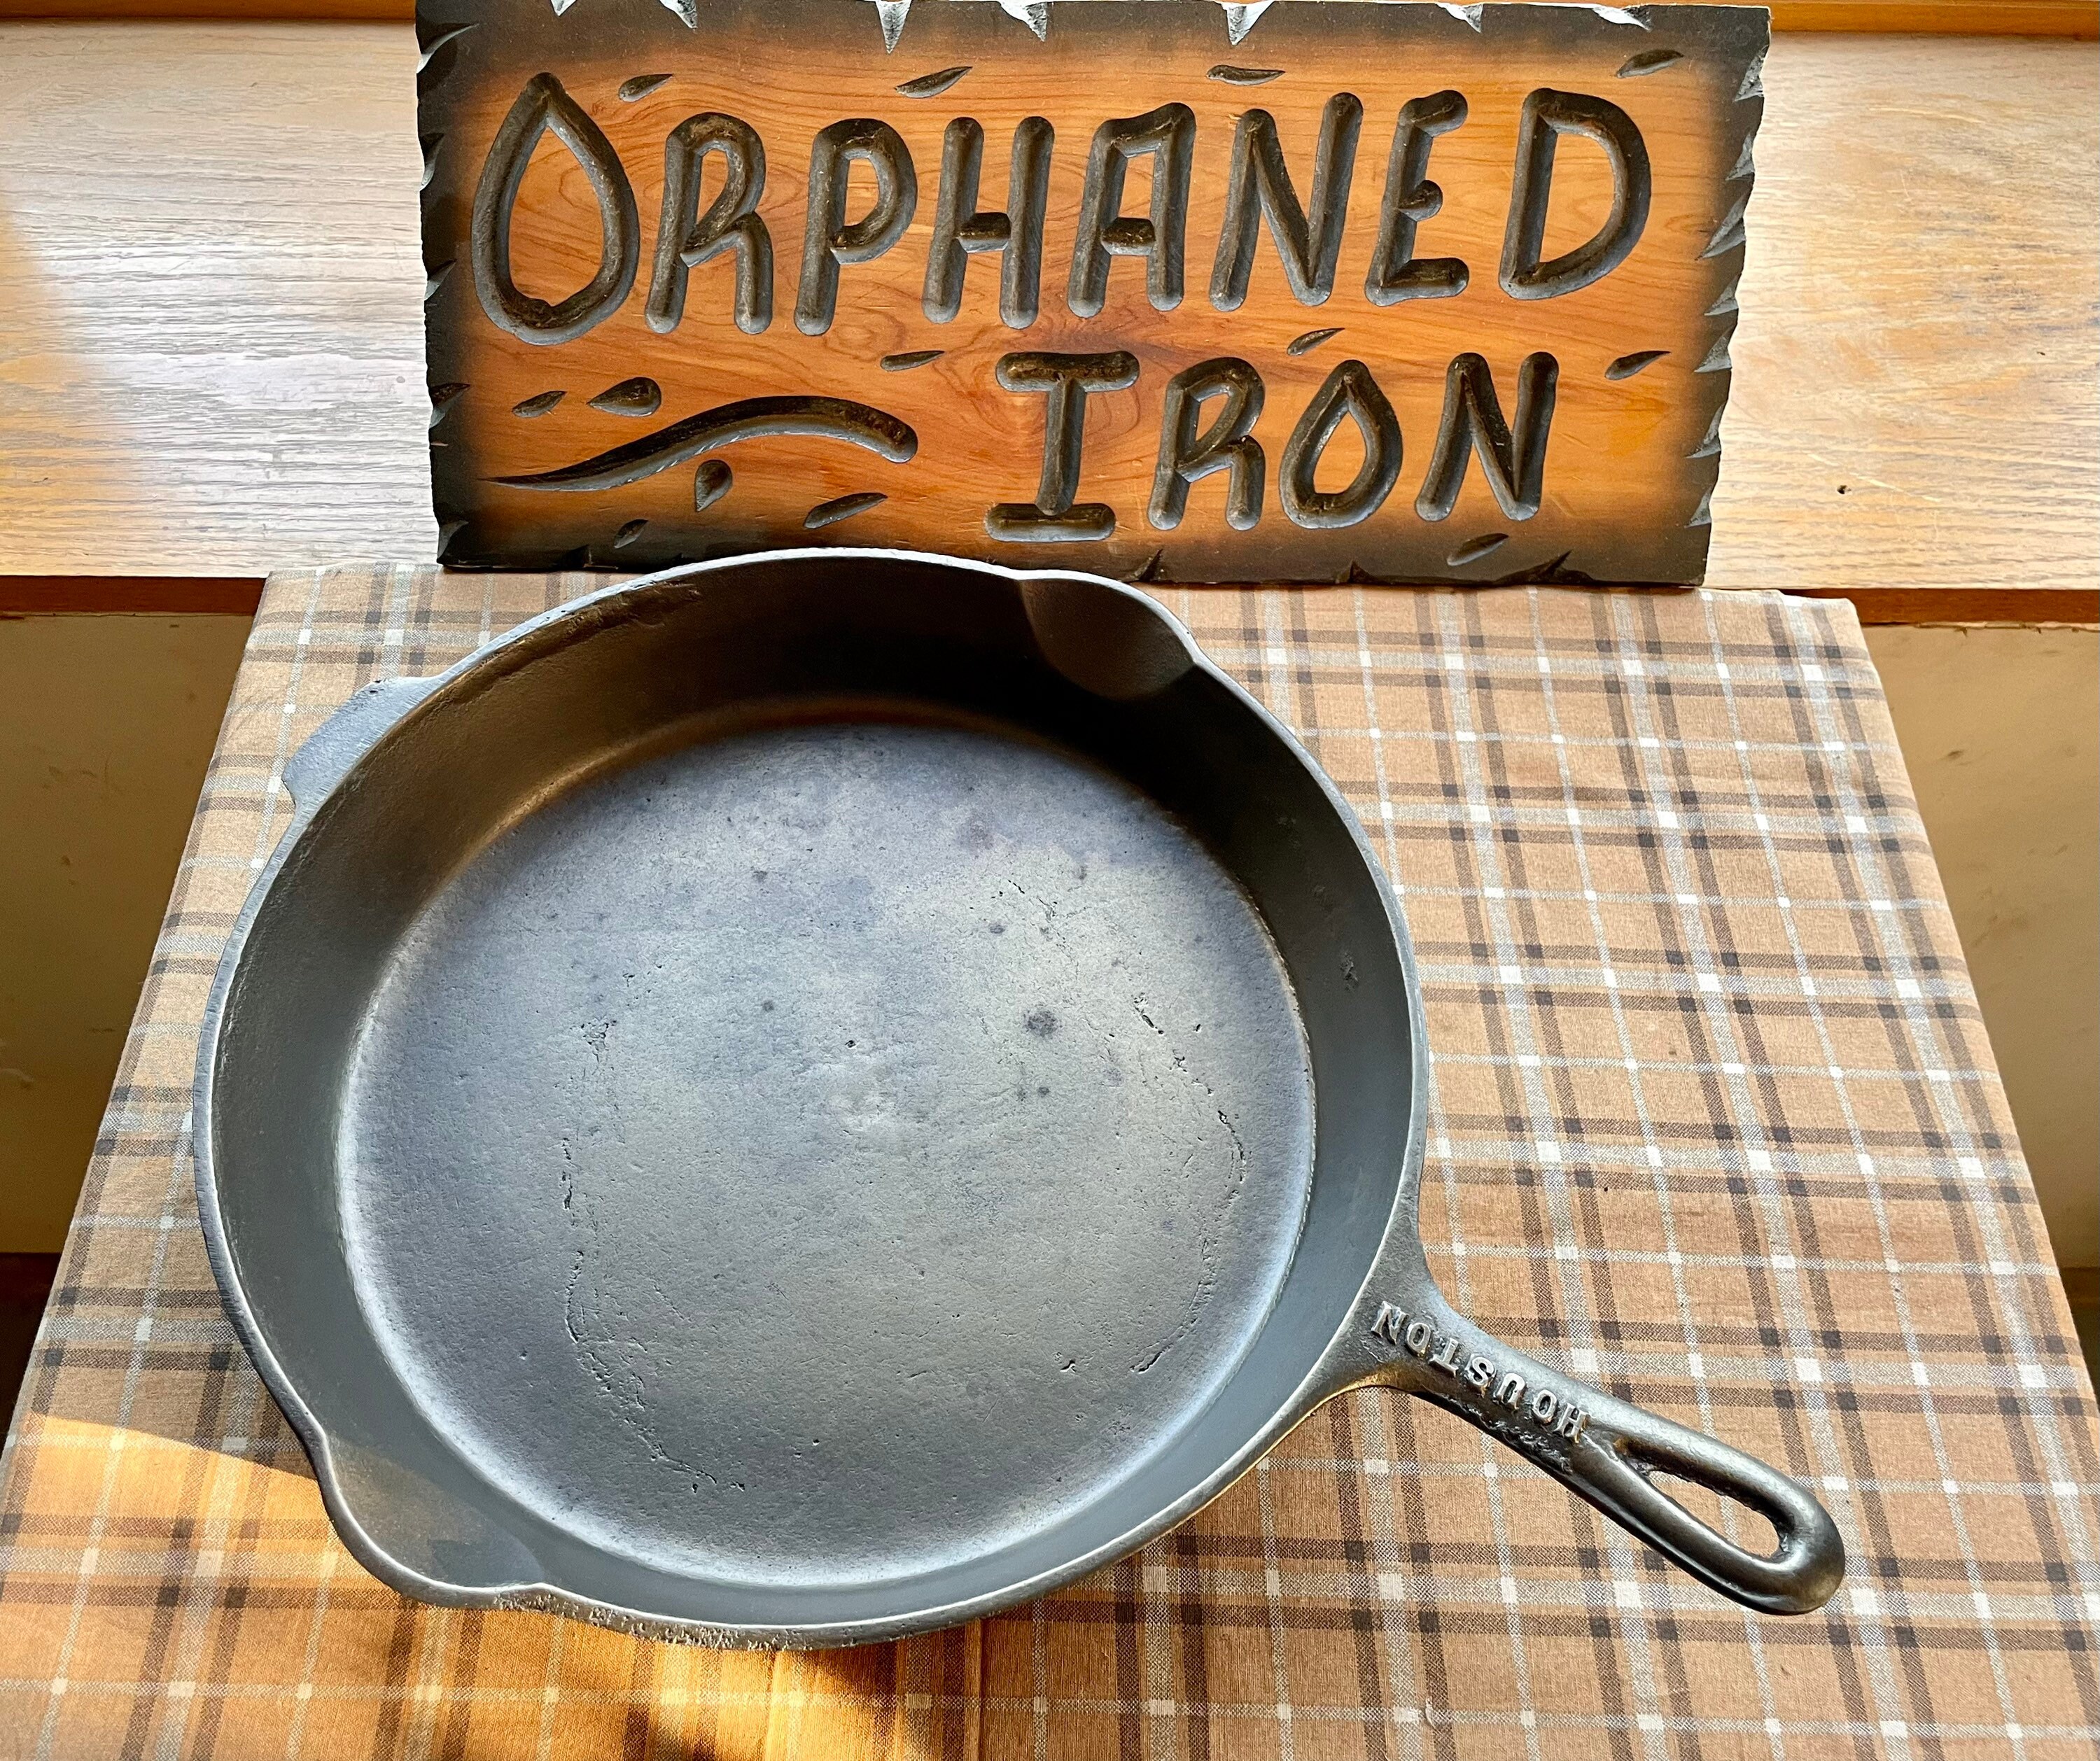 Took my new cast iron skillet & grate out to the Allegheny Forest for a  getaway - worked great! What camping food is best on these wonderful  skillets? : r/castiron